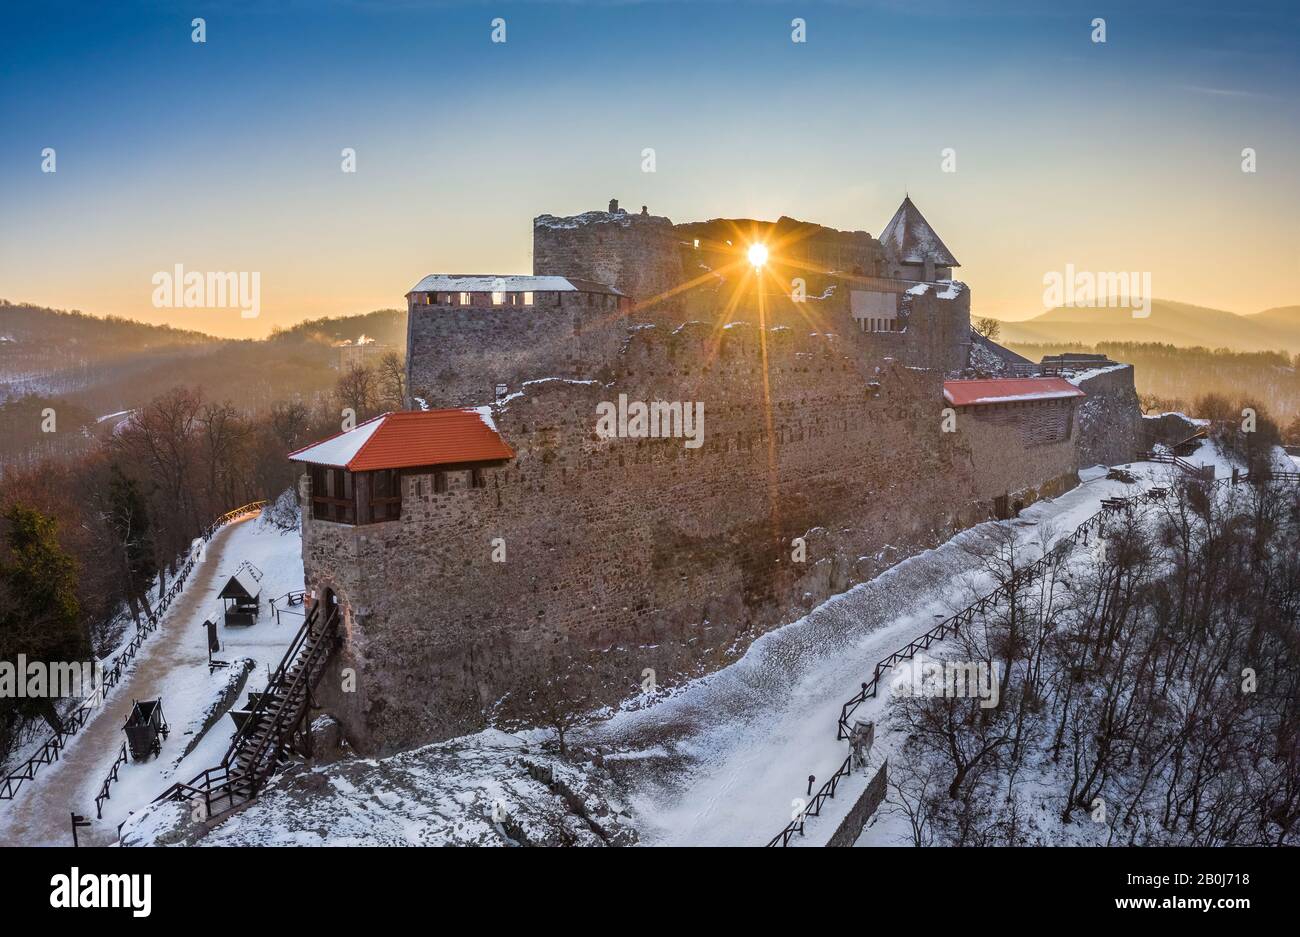 Visegrad, Hungary - Aerial view of the beautiful snowy high castle of Visegrad at sunrise on a winter morning Stock Photo